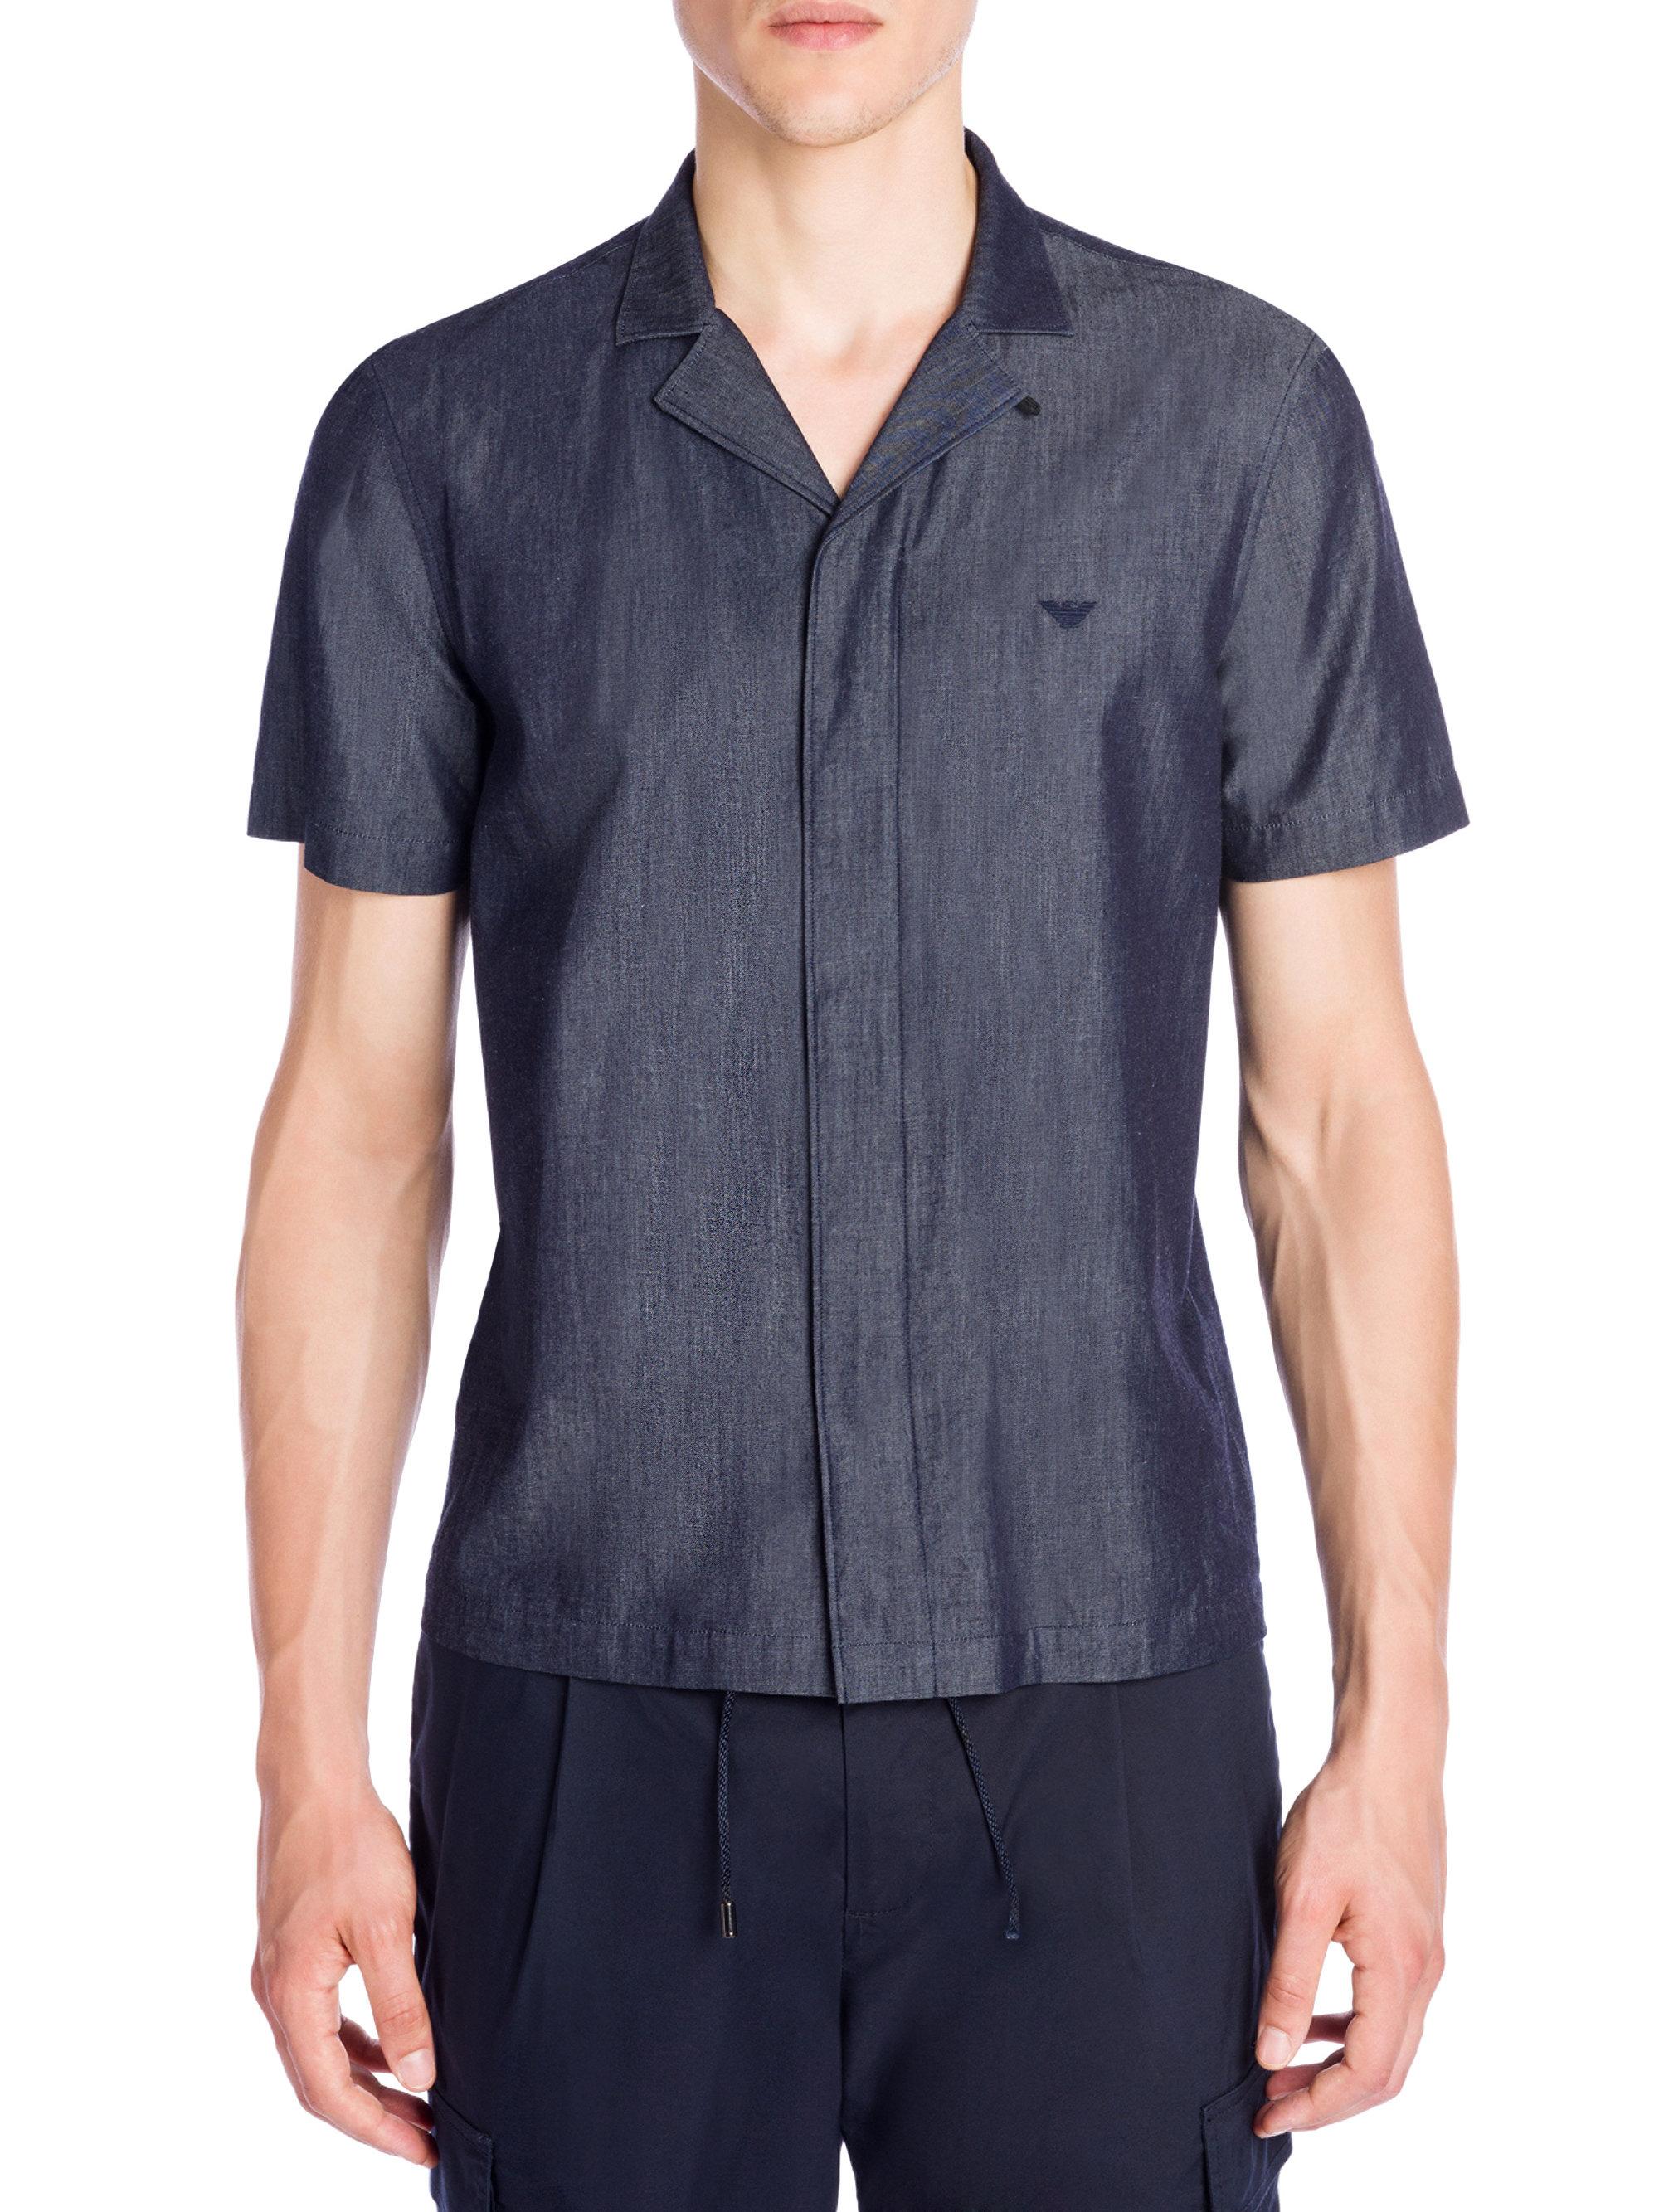 Emporio Armani Chambray Silk Shirt in Blue for Men - Lyst